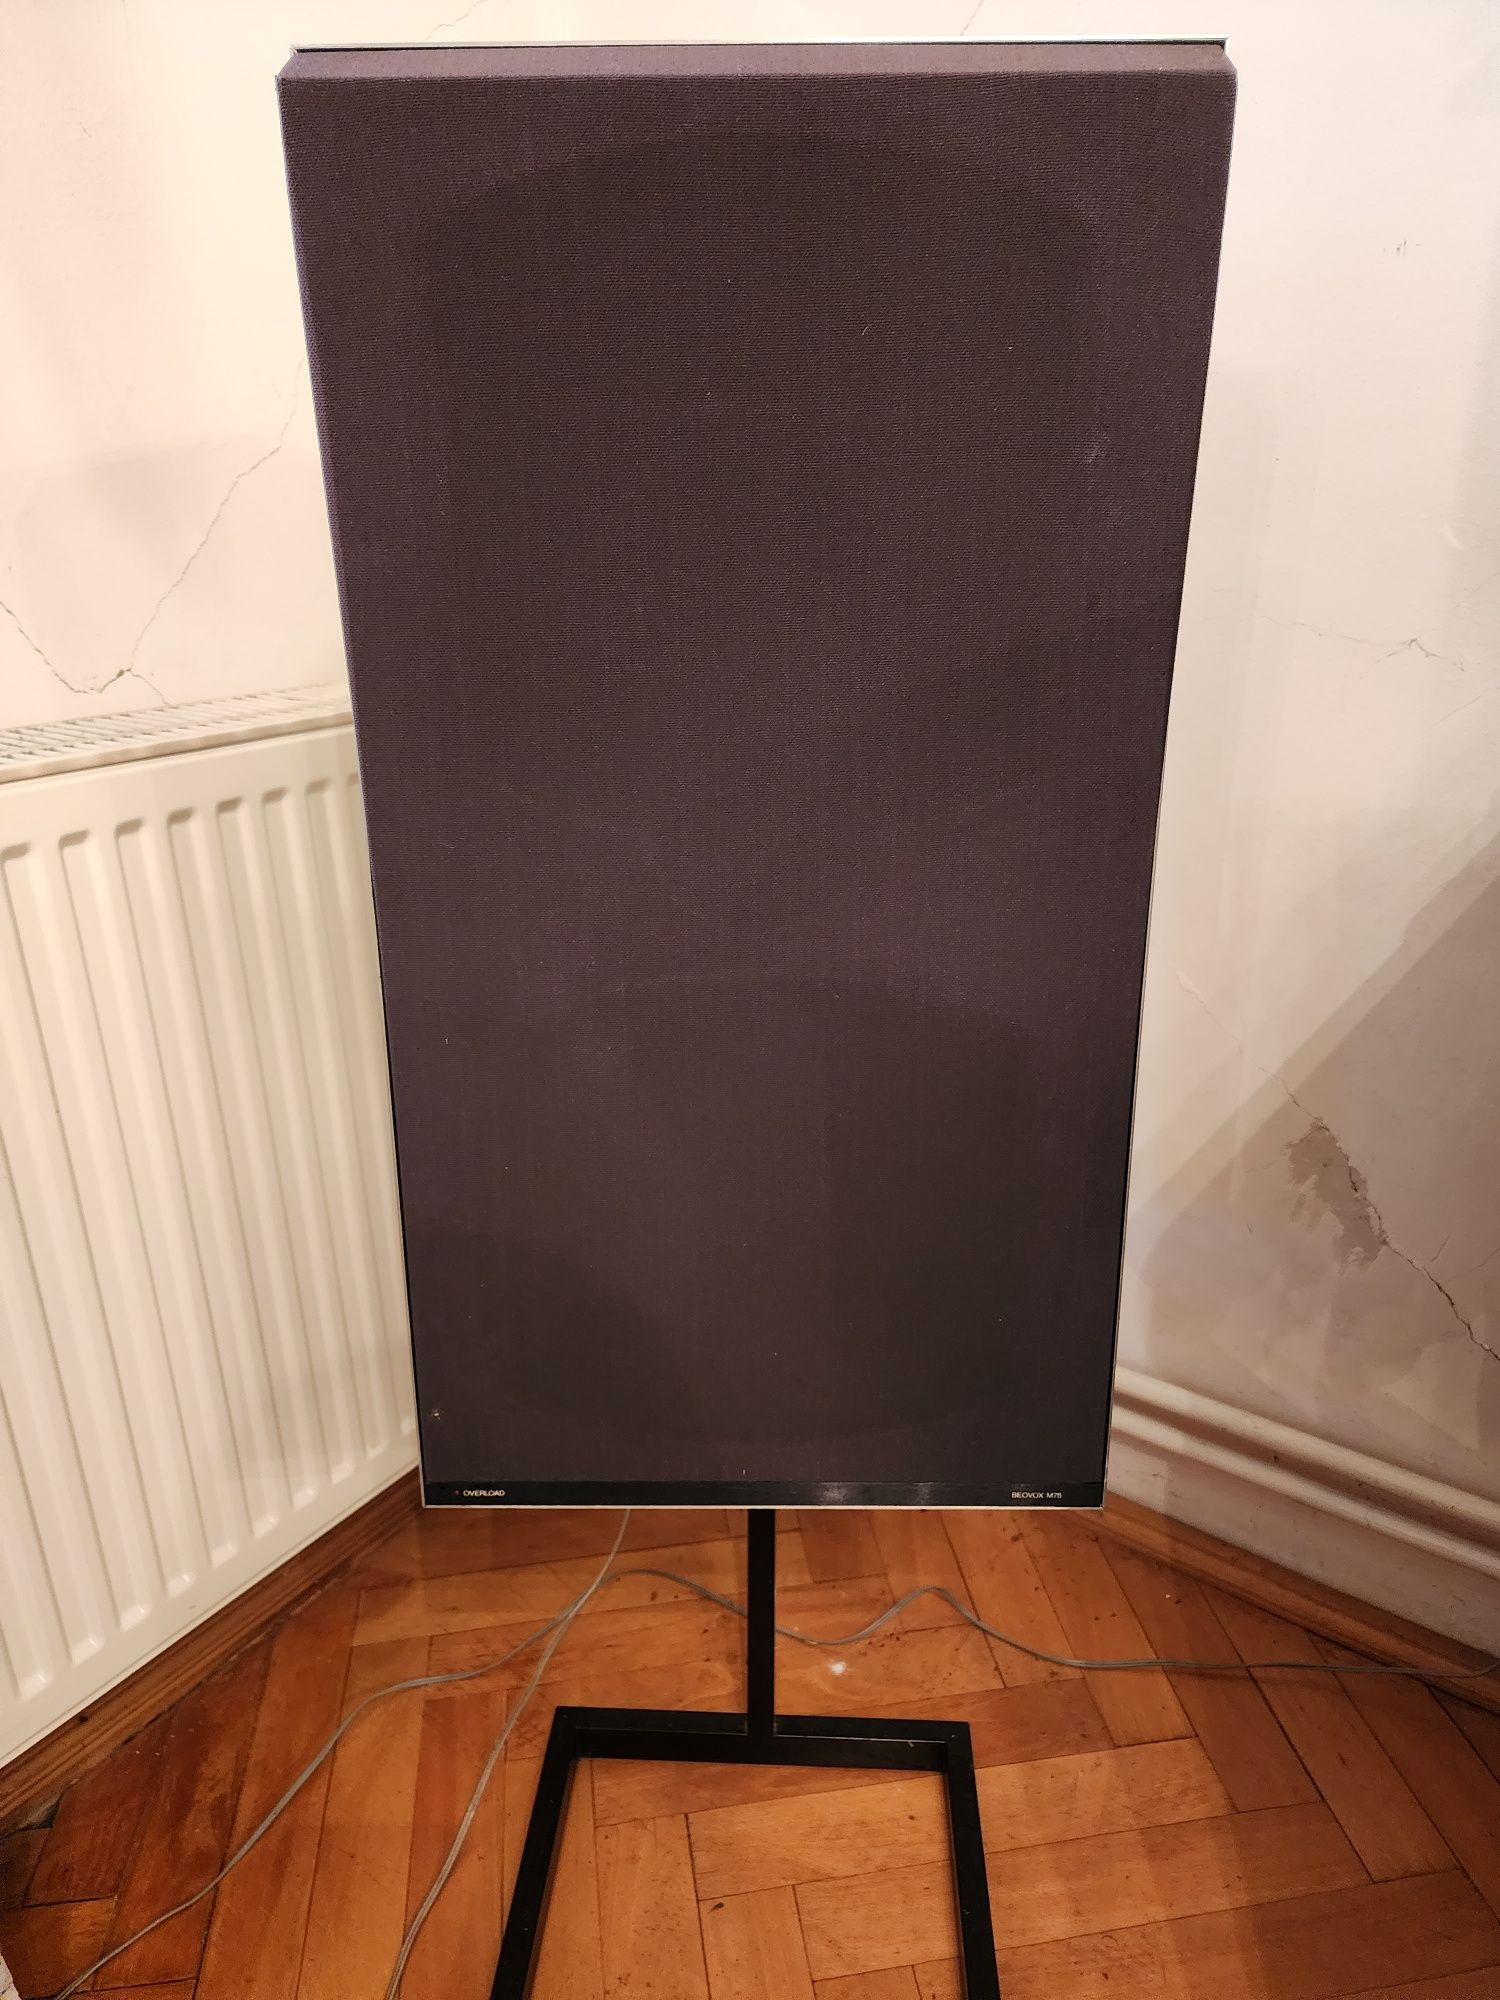 Set amplificator Bang and Olufsen Beomaster 4400 si boxe Beovox M75